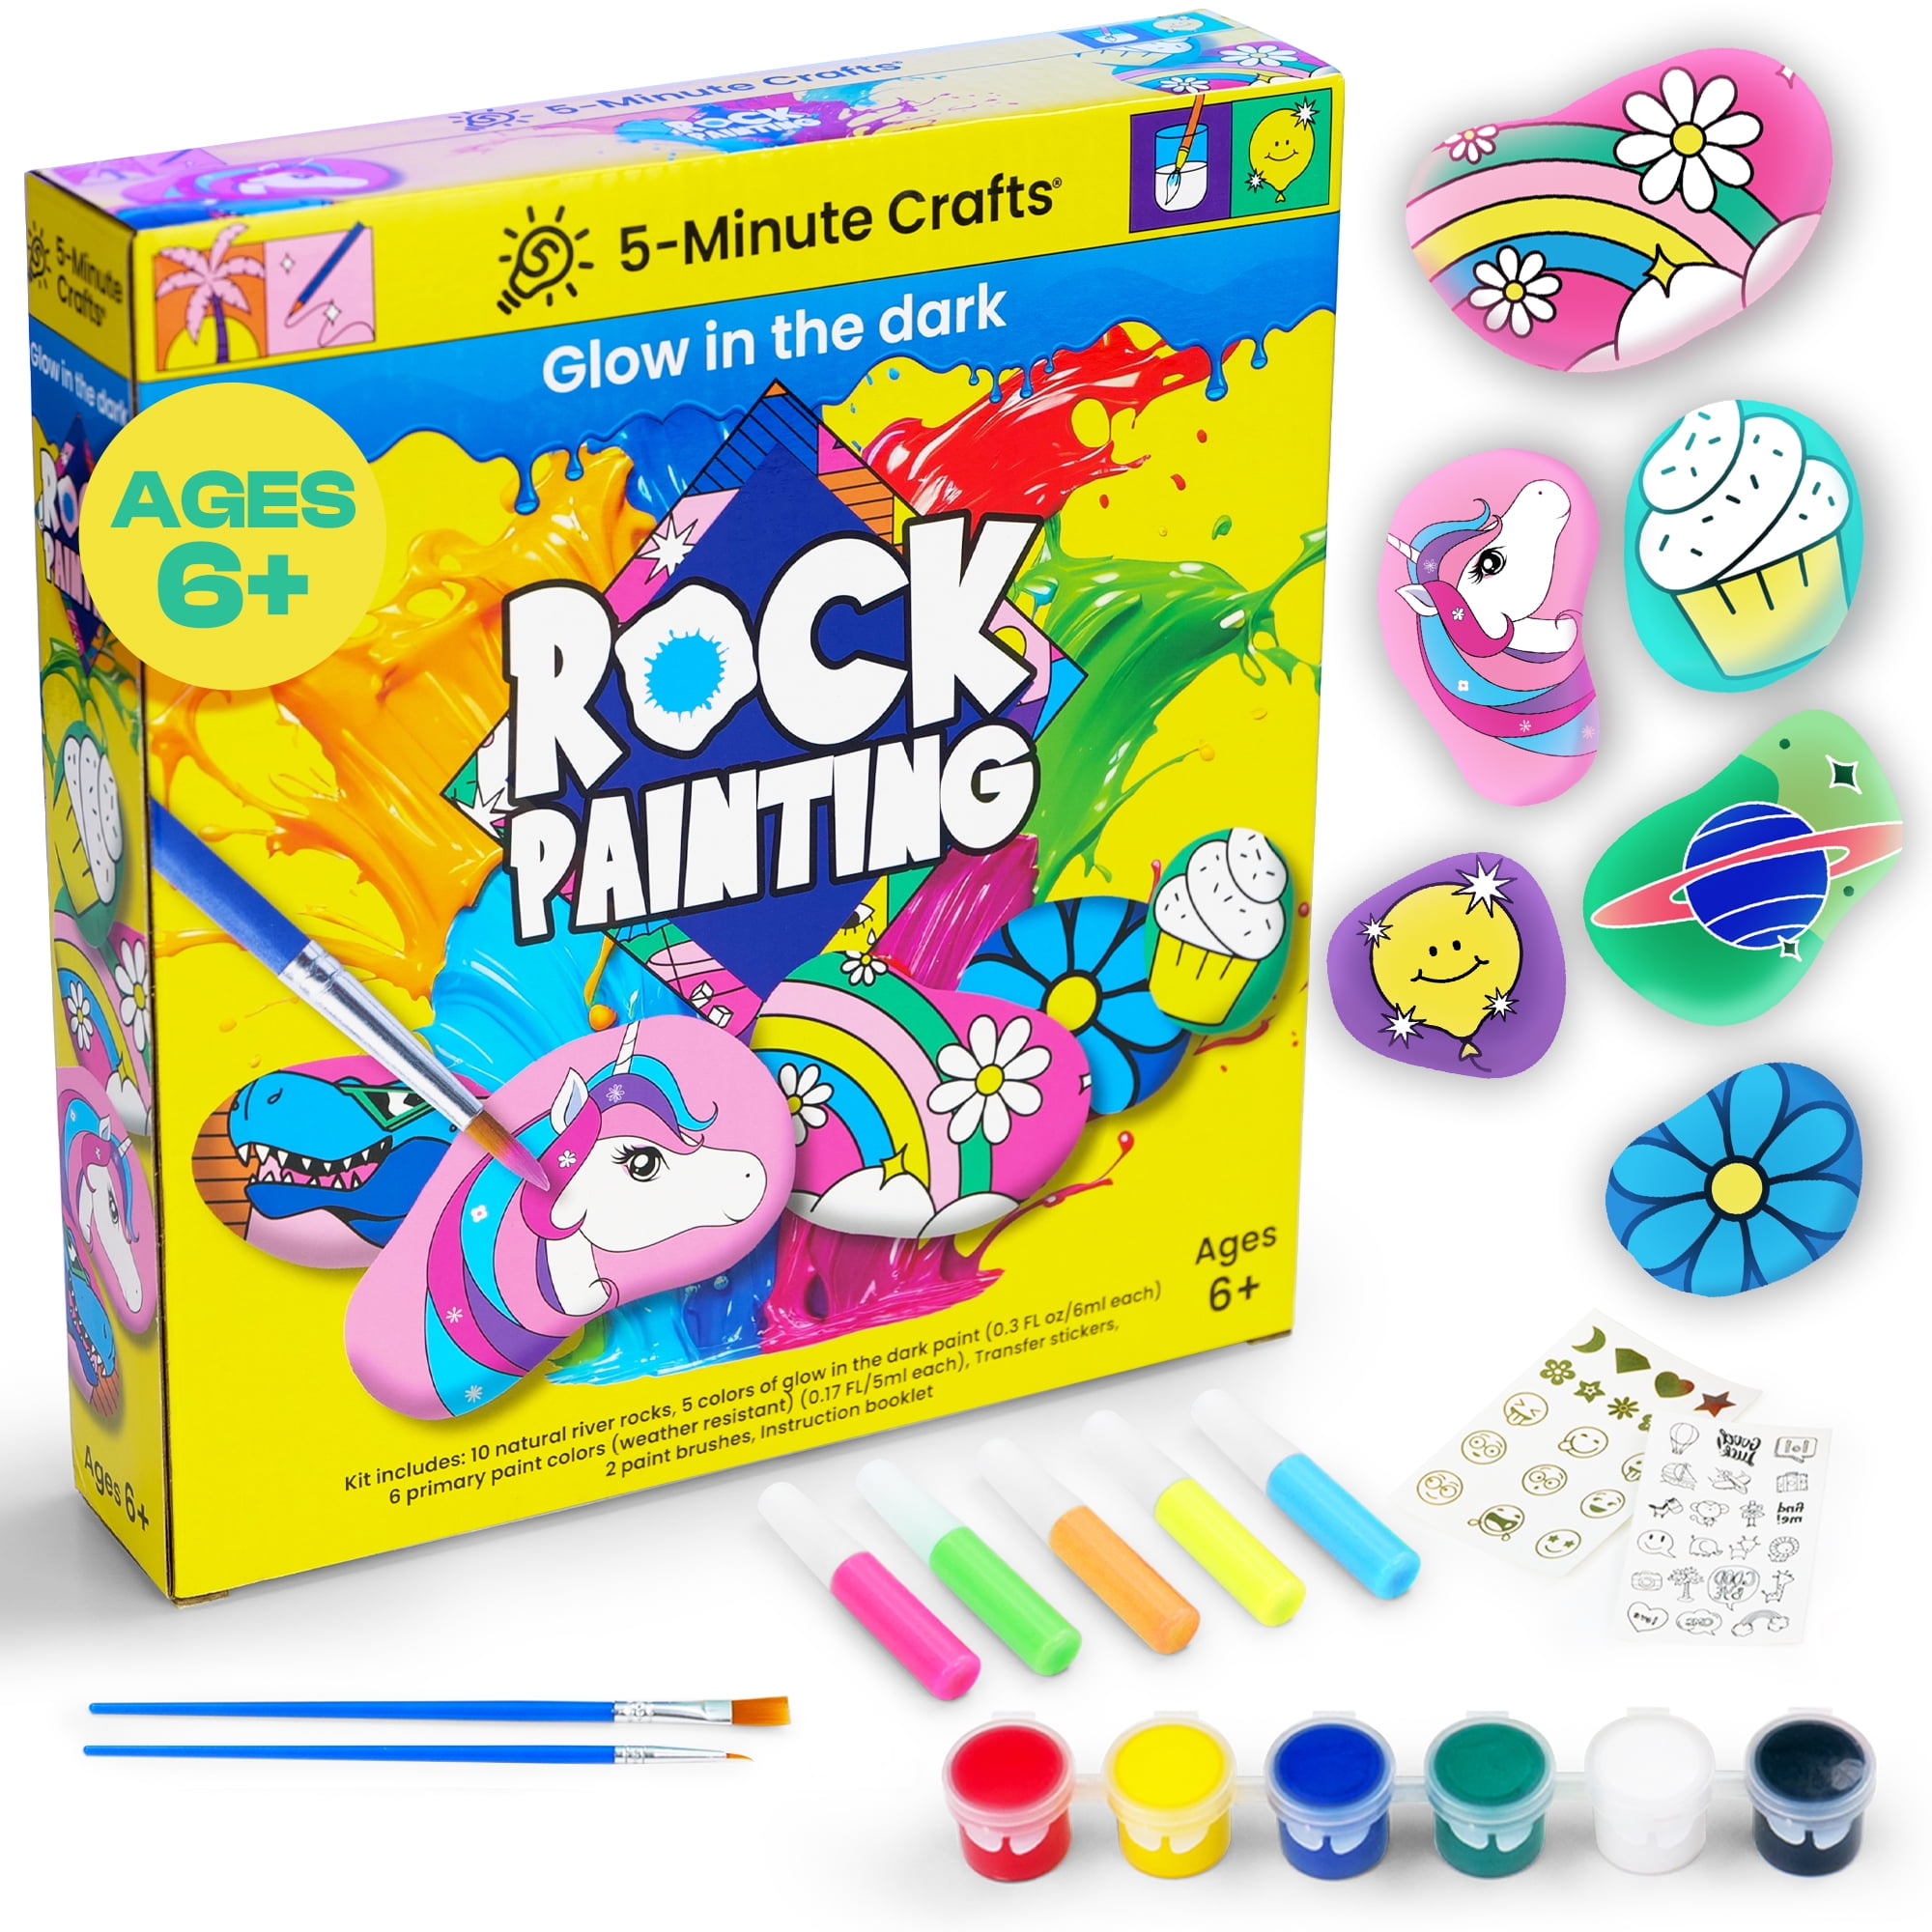 Premium Rock Painting Craft Kit - Includes Smooth Pebbles, Acrylic Paint  Pens, Paints and Brushes - Decorating Hobby Gift Set